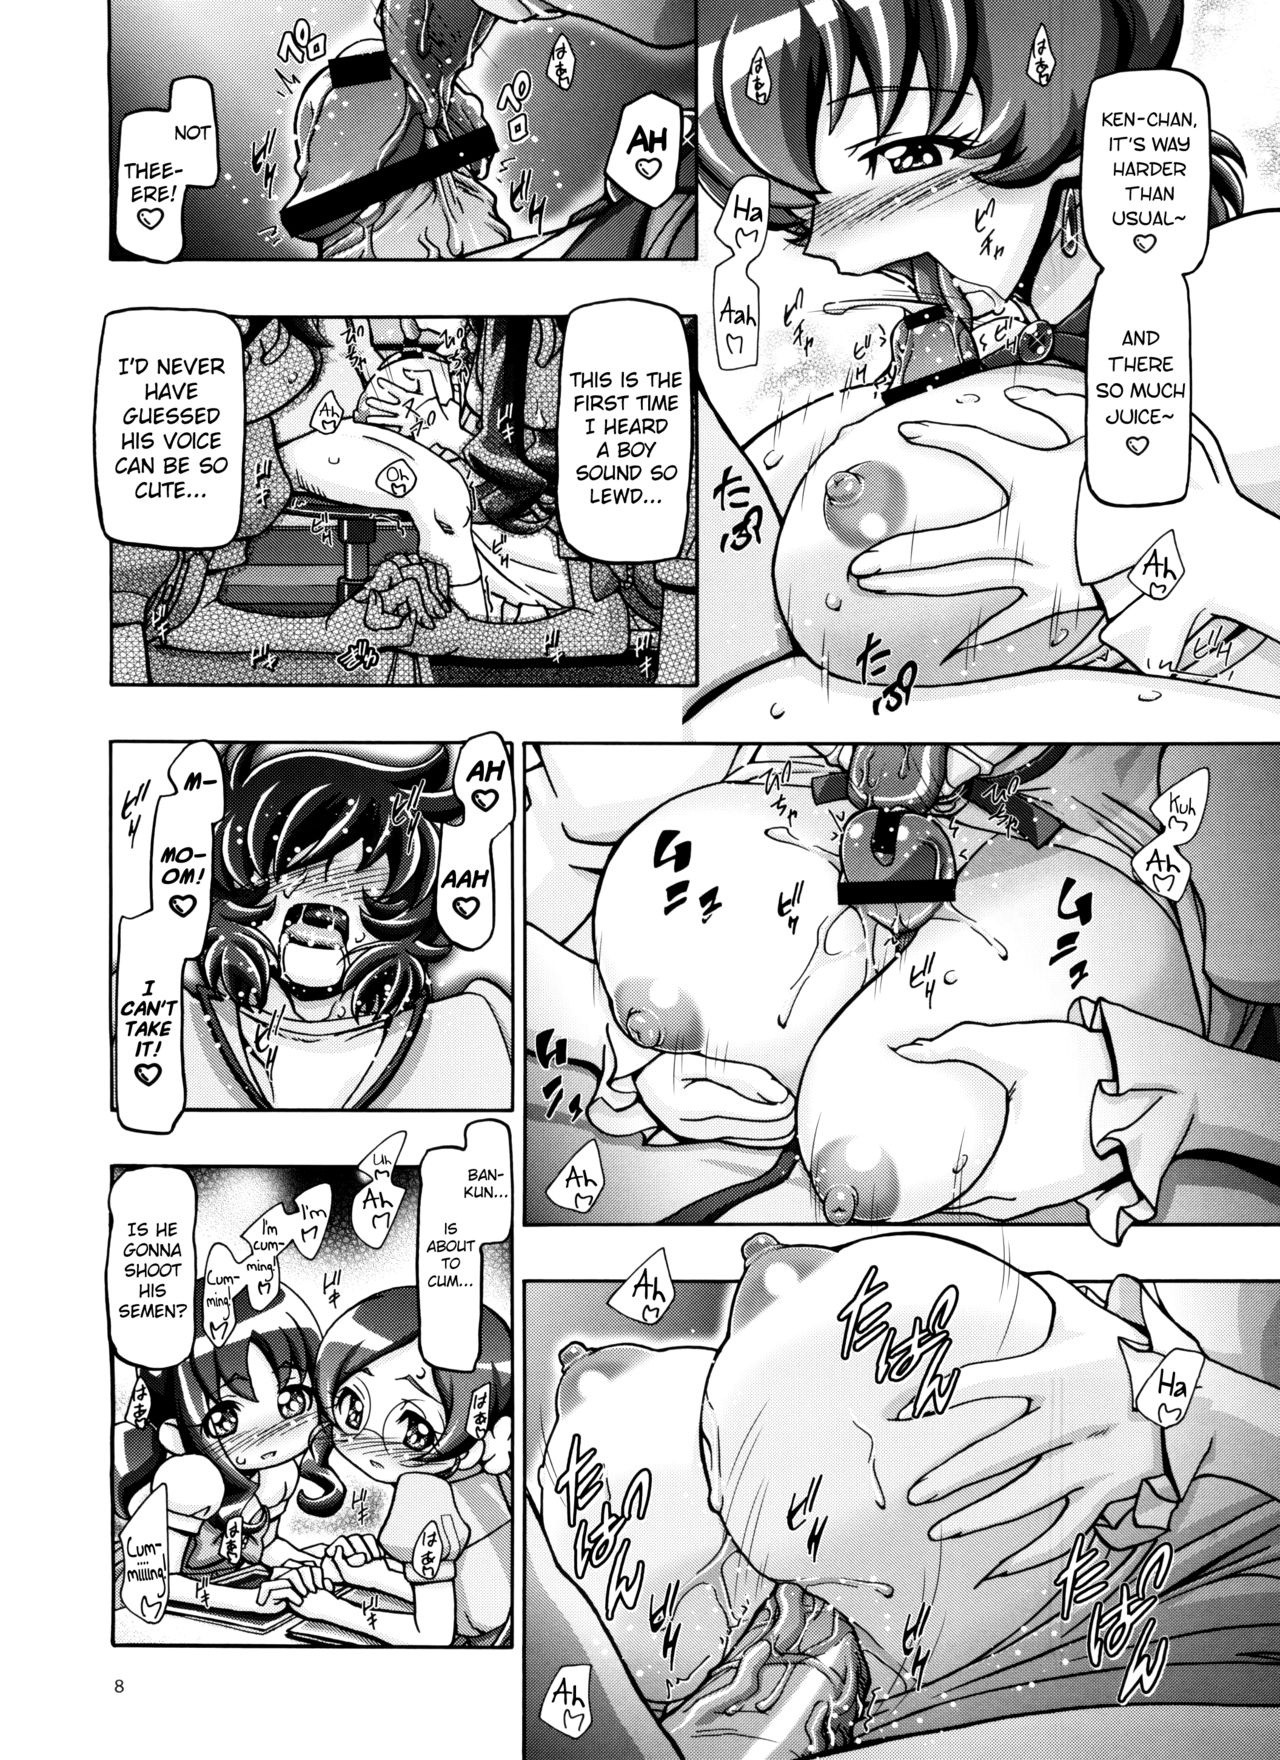 Heartcatch Mamacure hentai manga picture 8